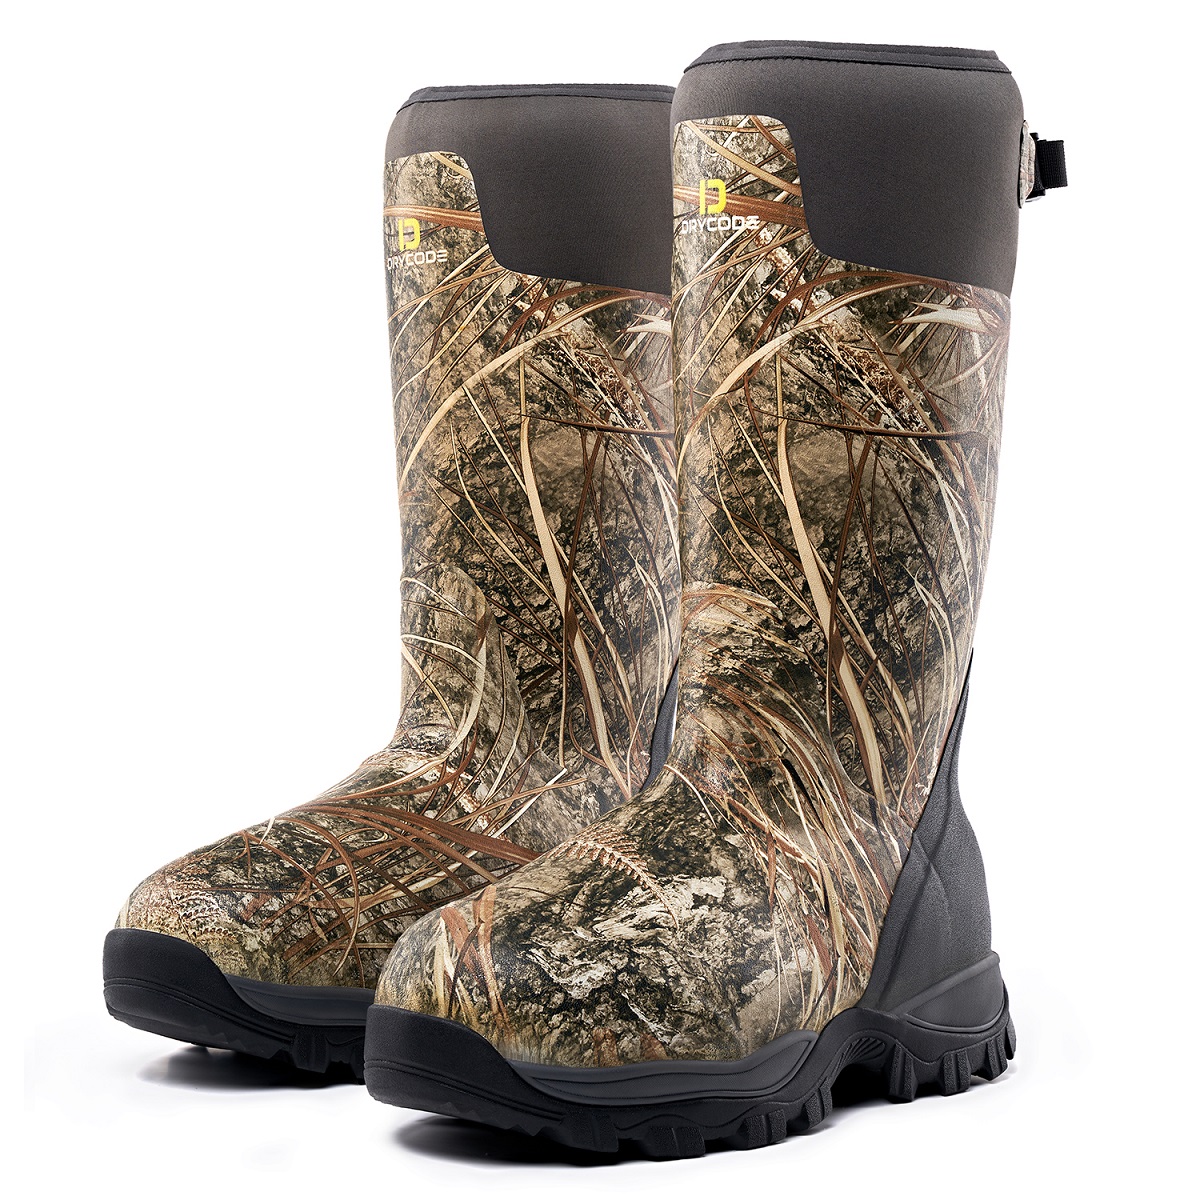 DRYCODE Hunting Boots Camo Waterproof Rubber with 5mm Neoprene